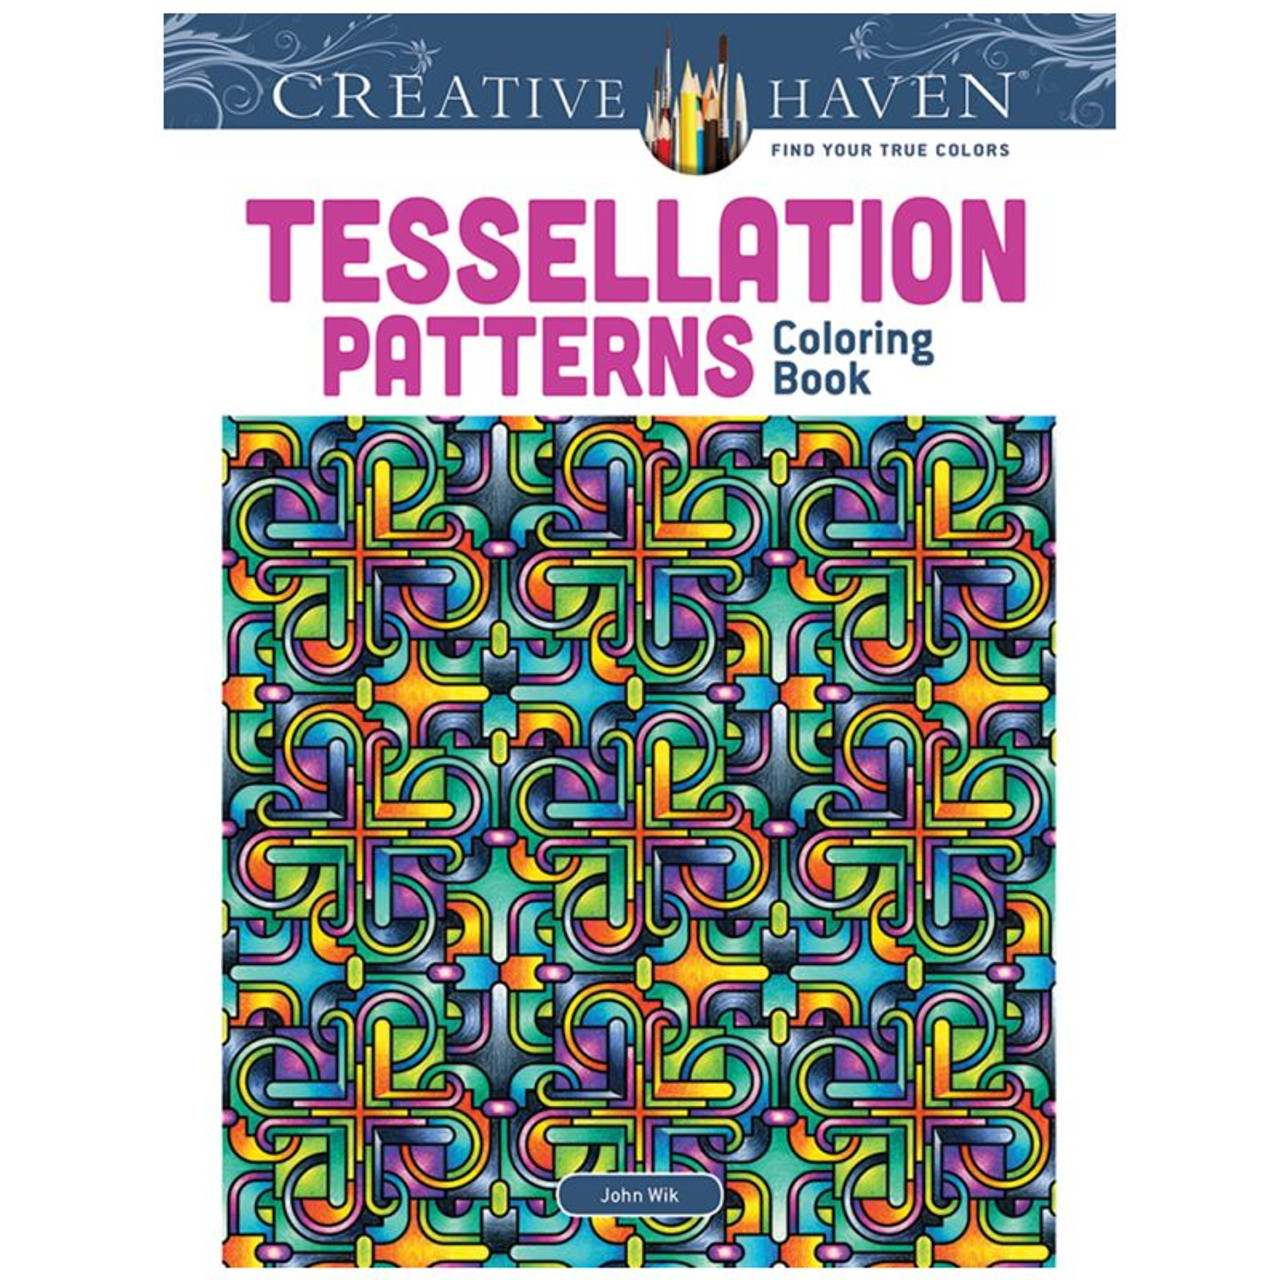 Creative haven tessellation patterns coloring book